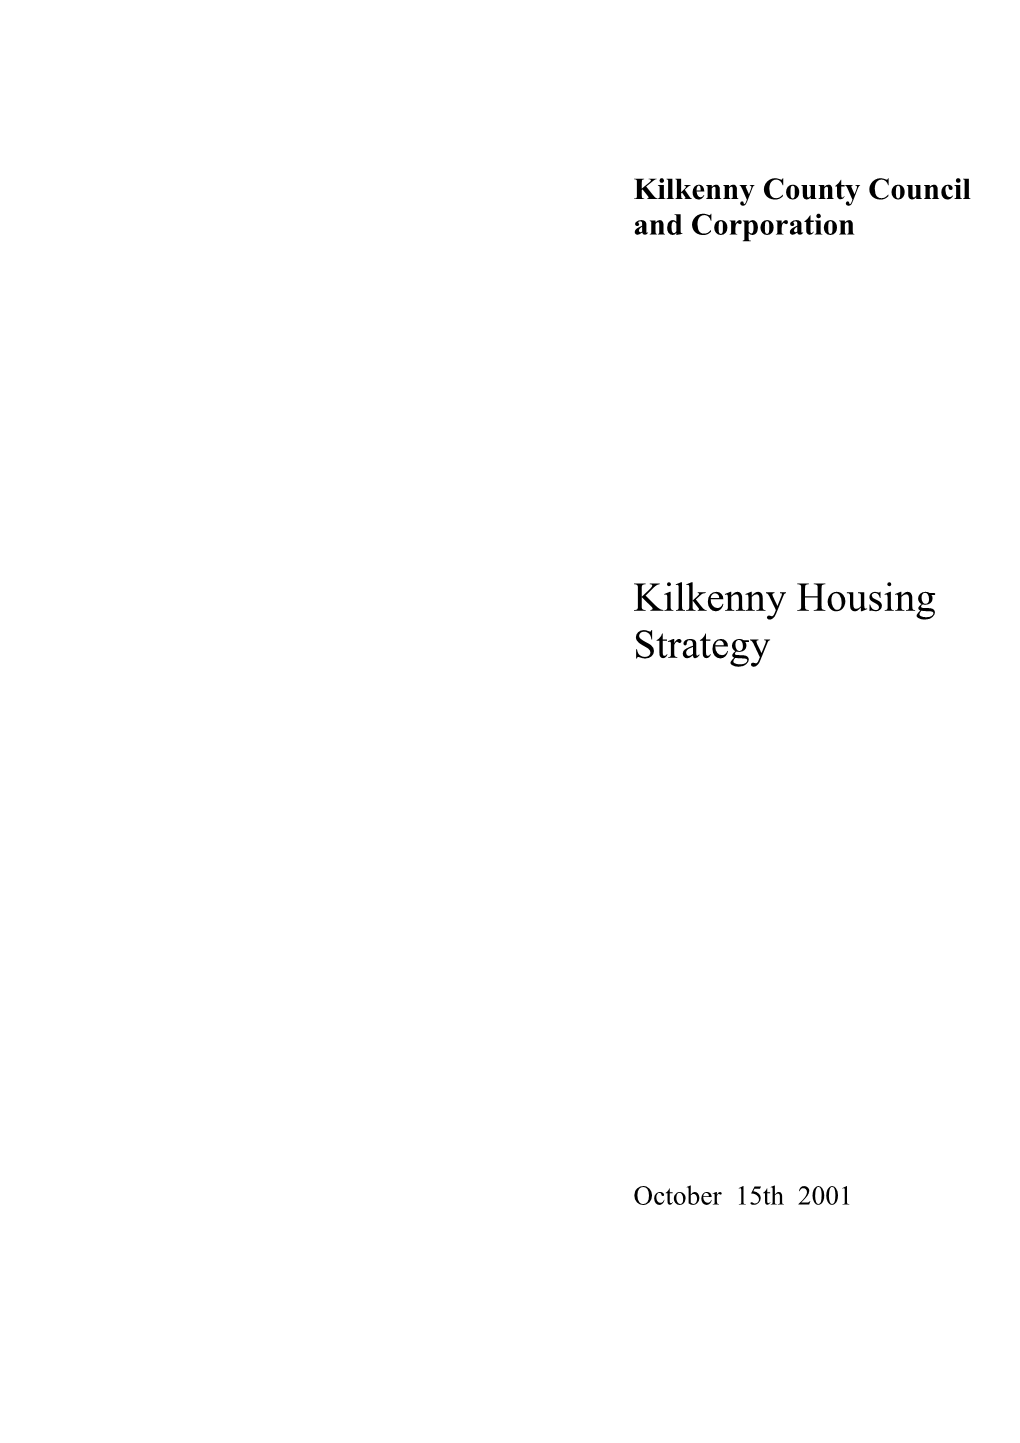 Kilkenny County Council and Corporation